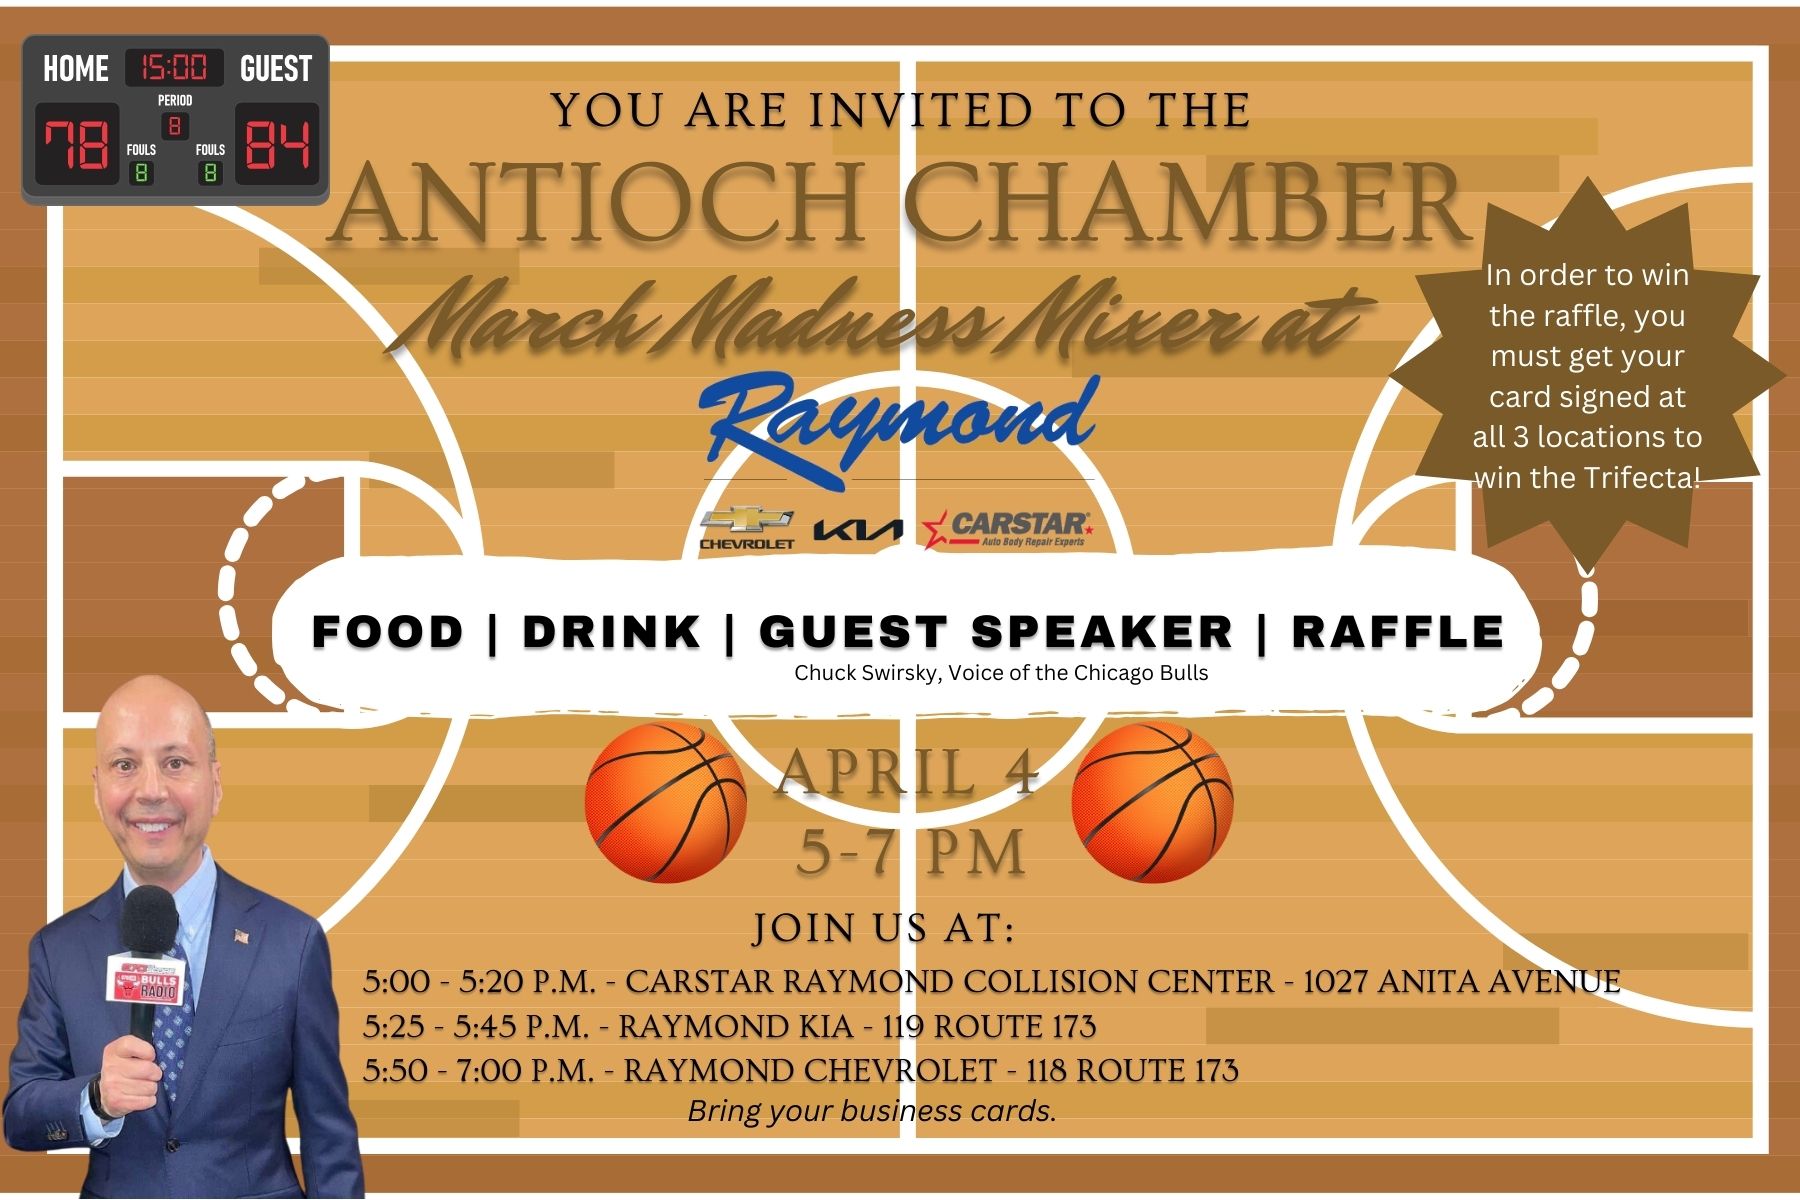 March Madness After Hours Mixer at Raymond Chevrolet, Kia and CarStar